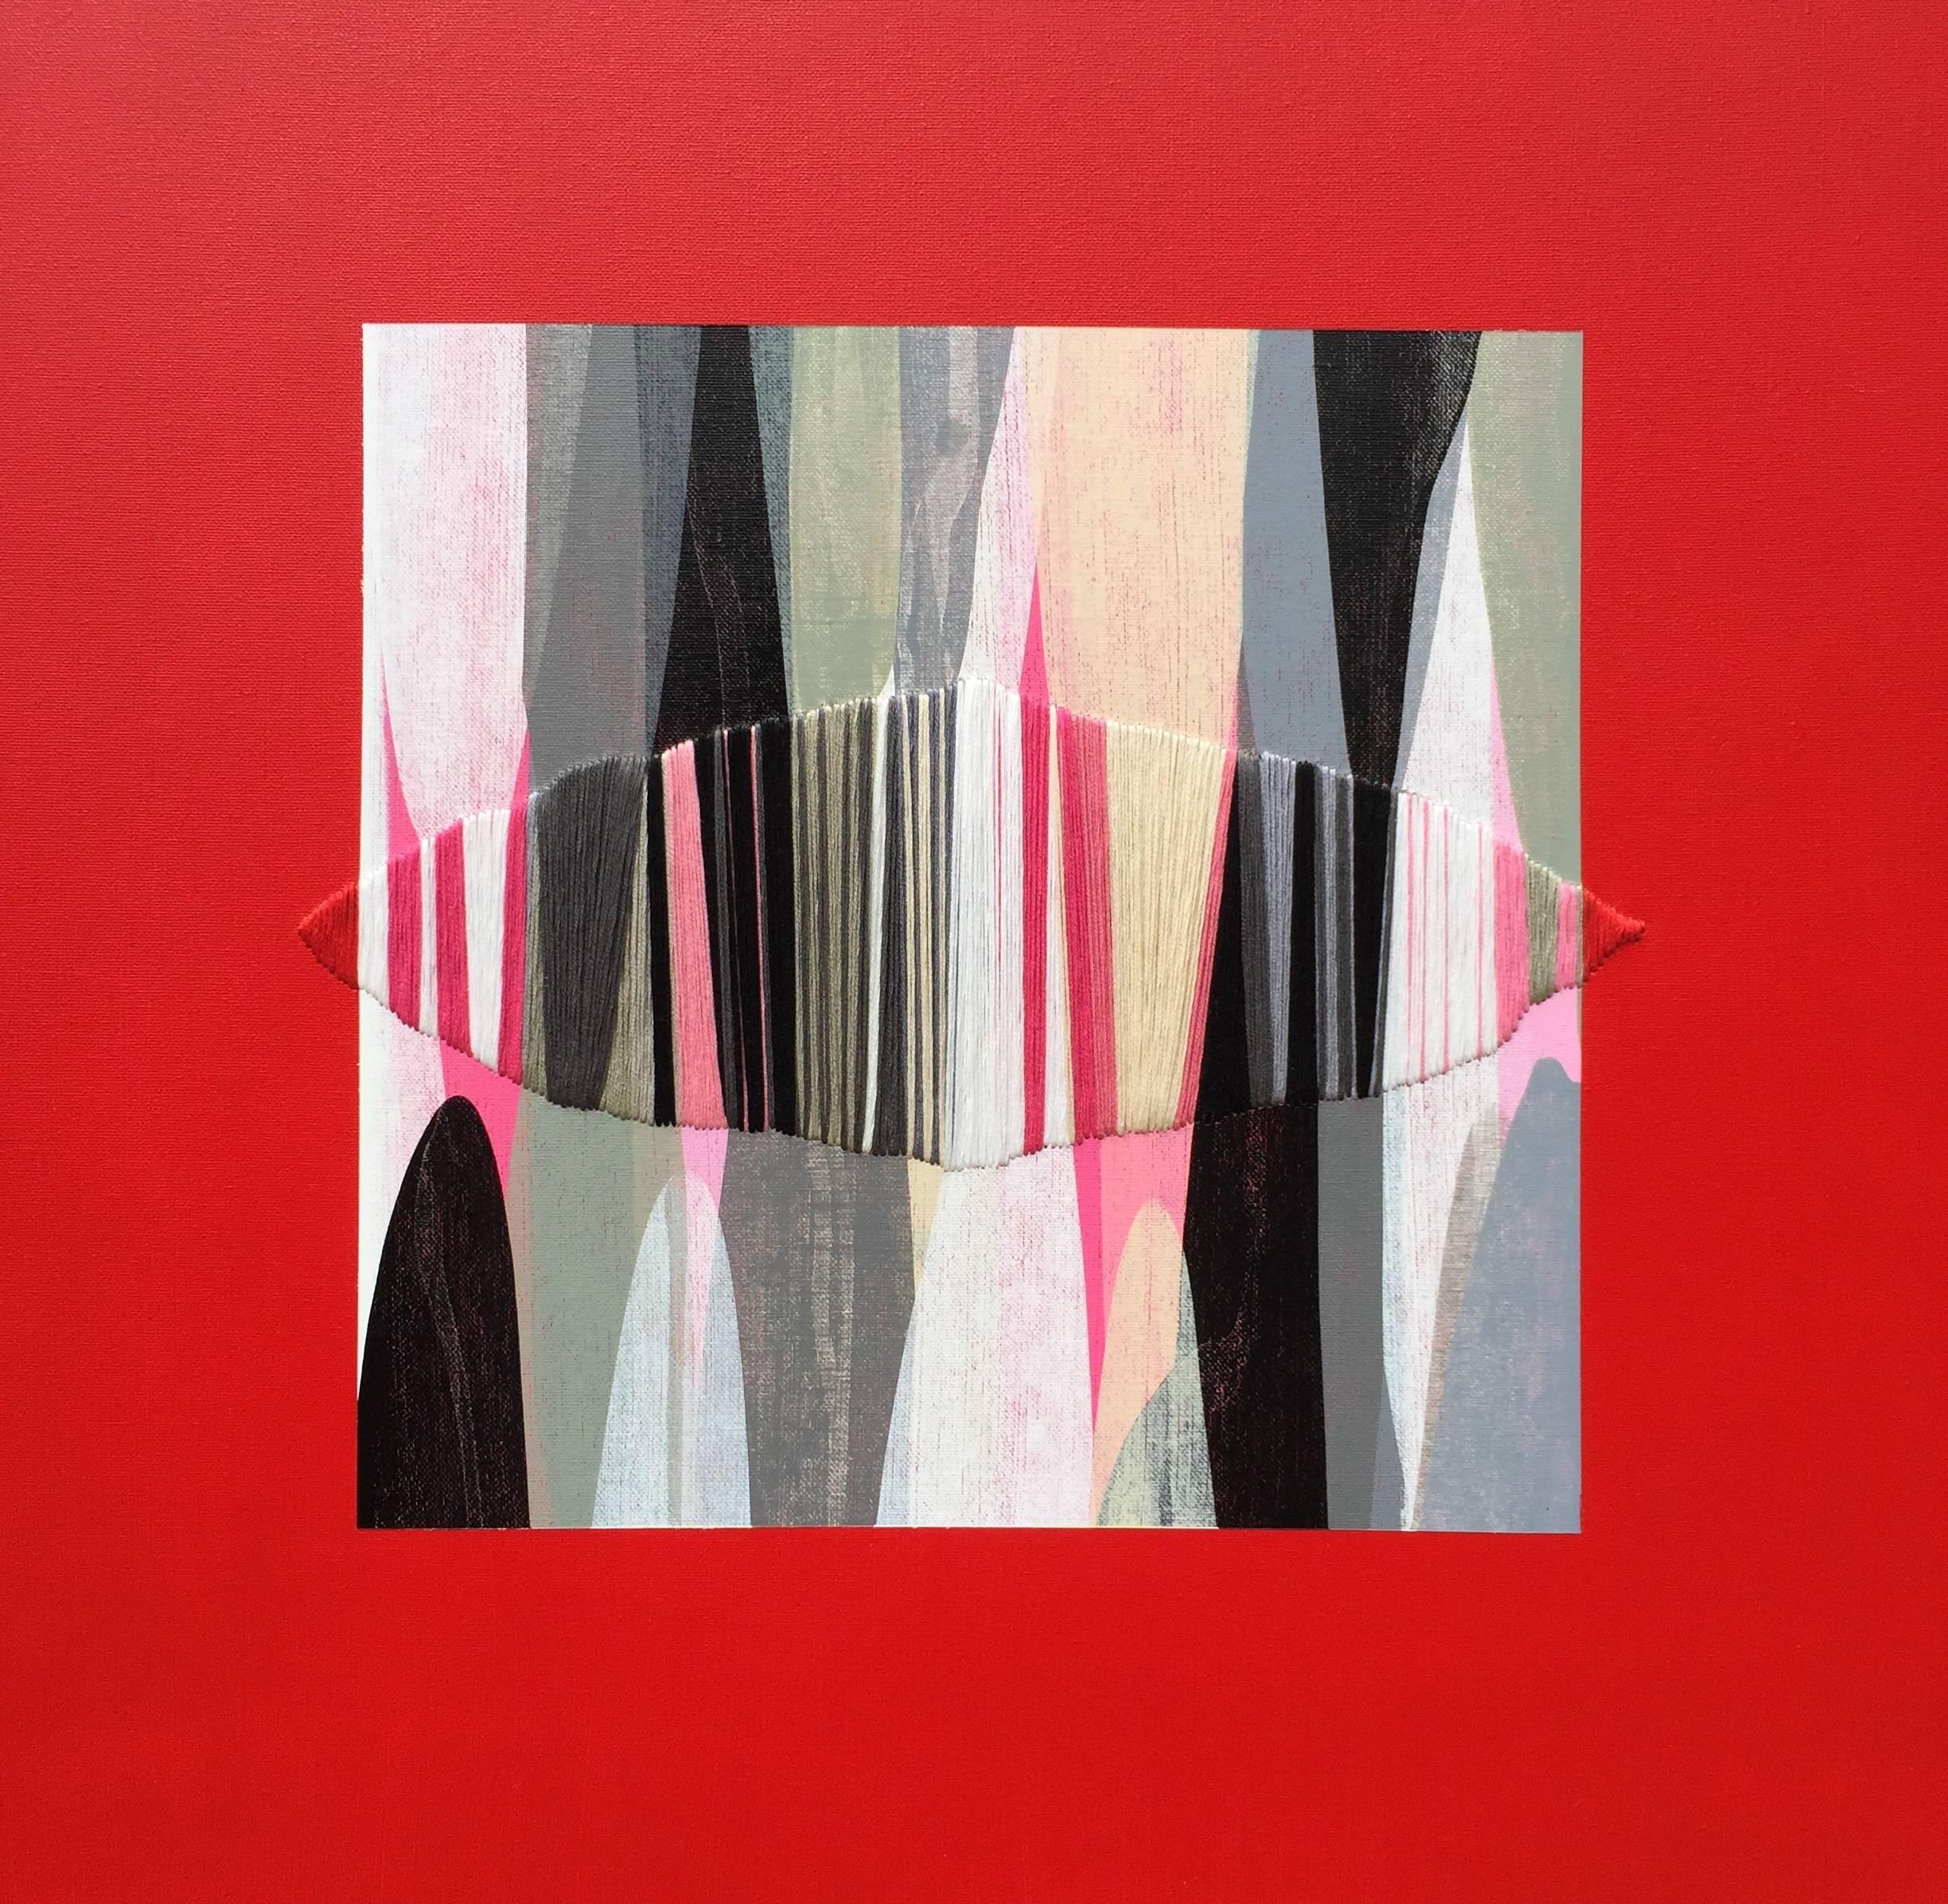 Poemes XXXVII - Red White and Black Original Mixed Media Artwork on Canvas